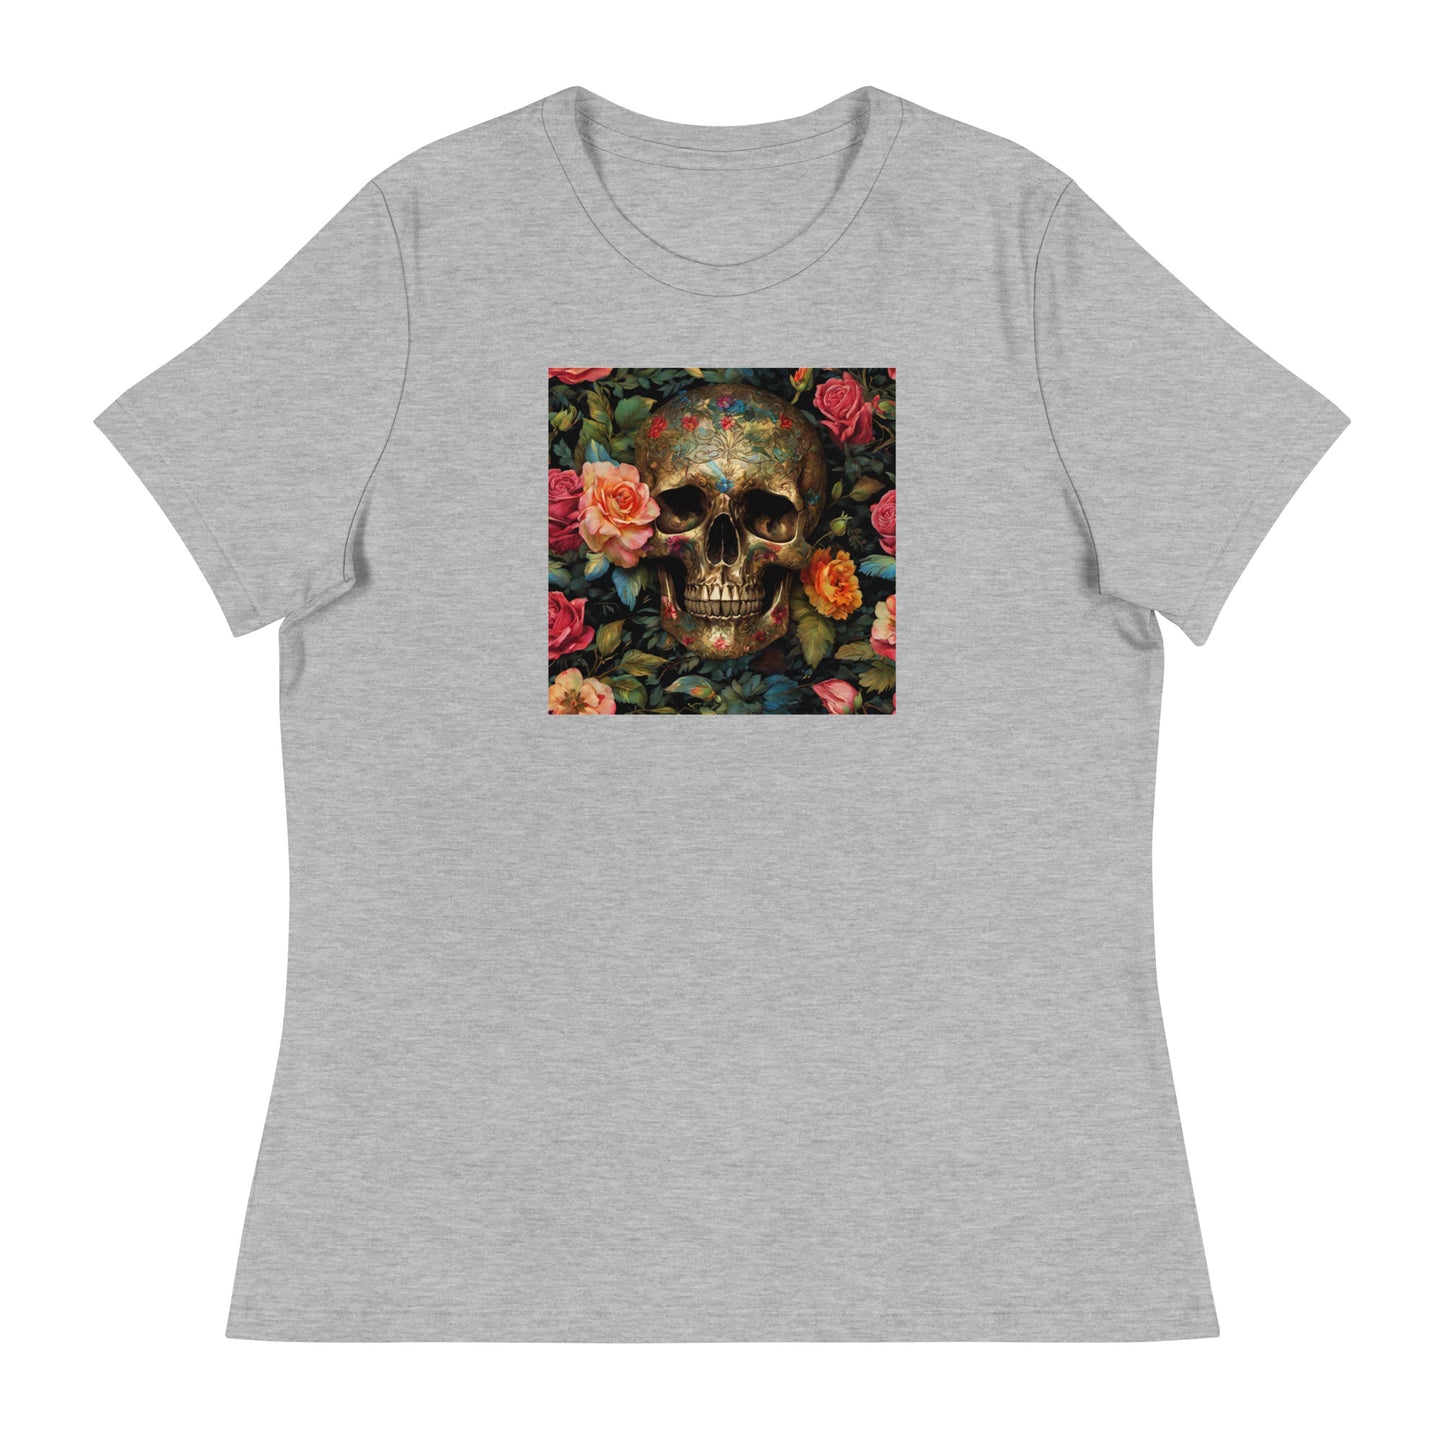 Skull and Roses Graphic Women's T-Shirt Athletic Heather